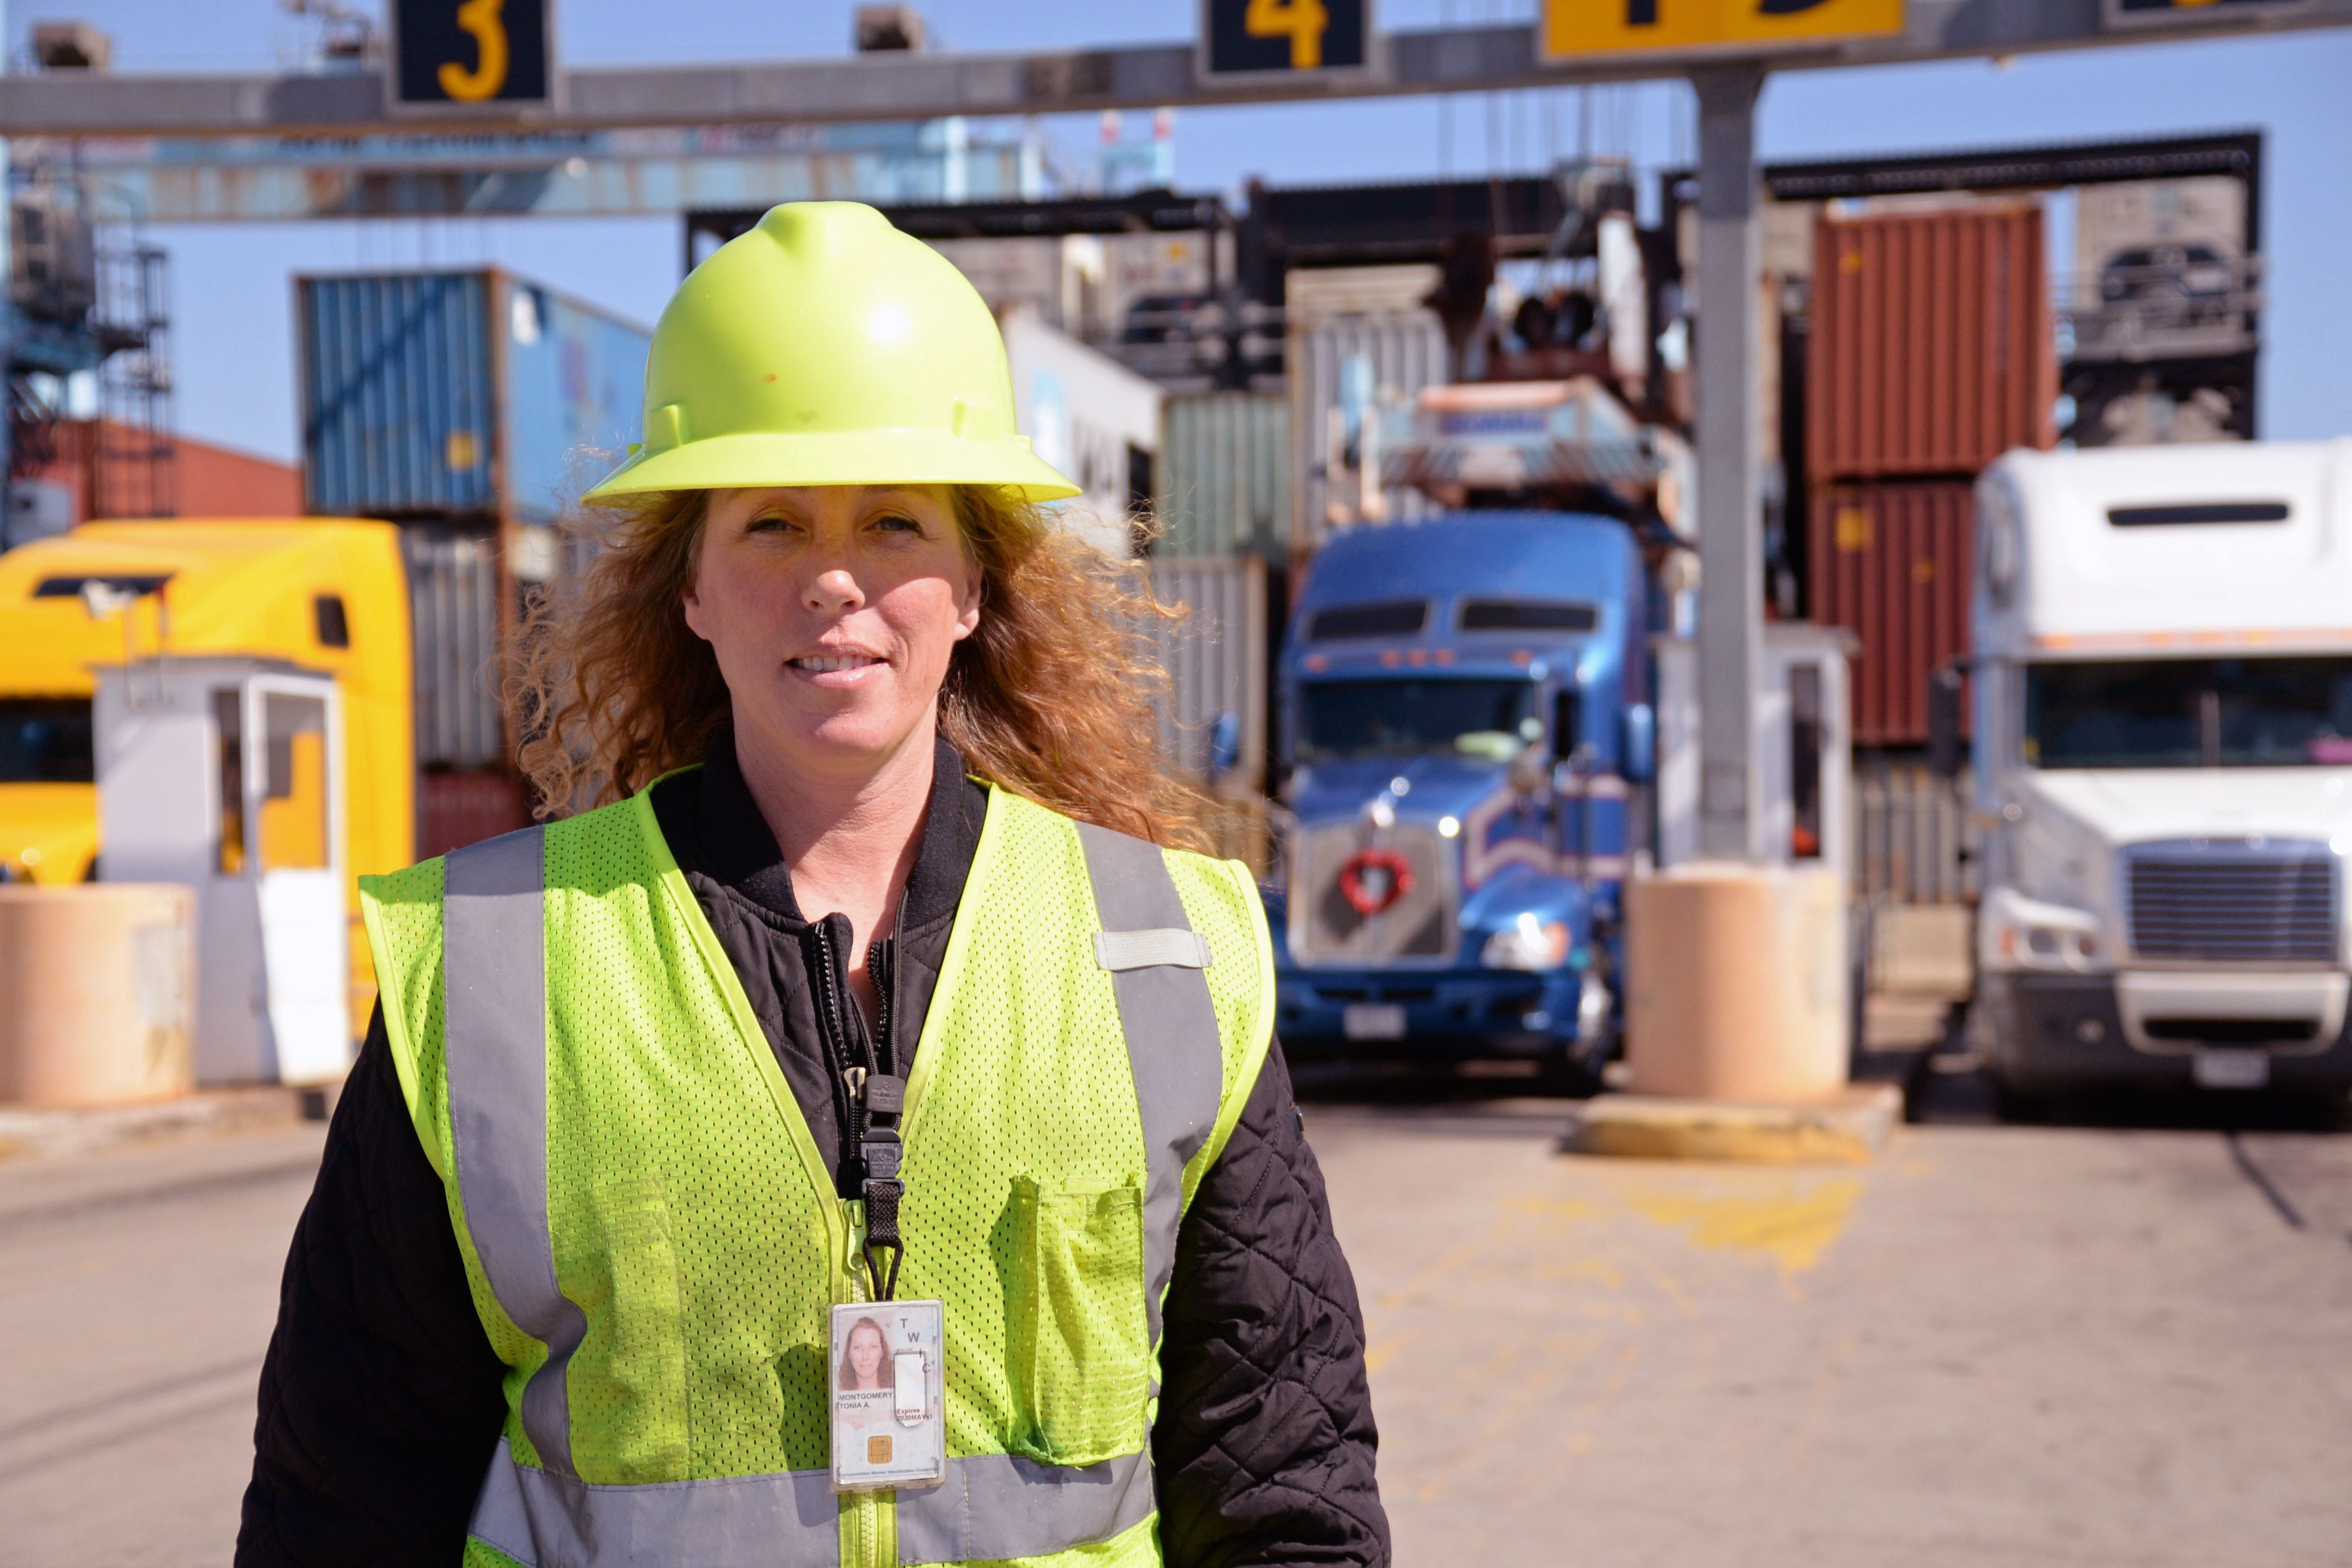 Sgt. 1st Class Tonia Montgomery is spending a year working as an operations assistant manager at Virginia International Terminals at Virginia International Gateway in Portsmouth, Virginia, as part of the Army’s Training With Industry program. (Photos by Jonathan (Jay) Koester / NCO Journal)